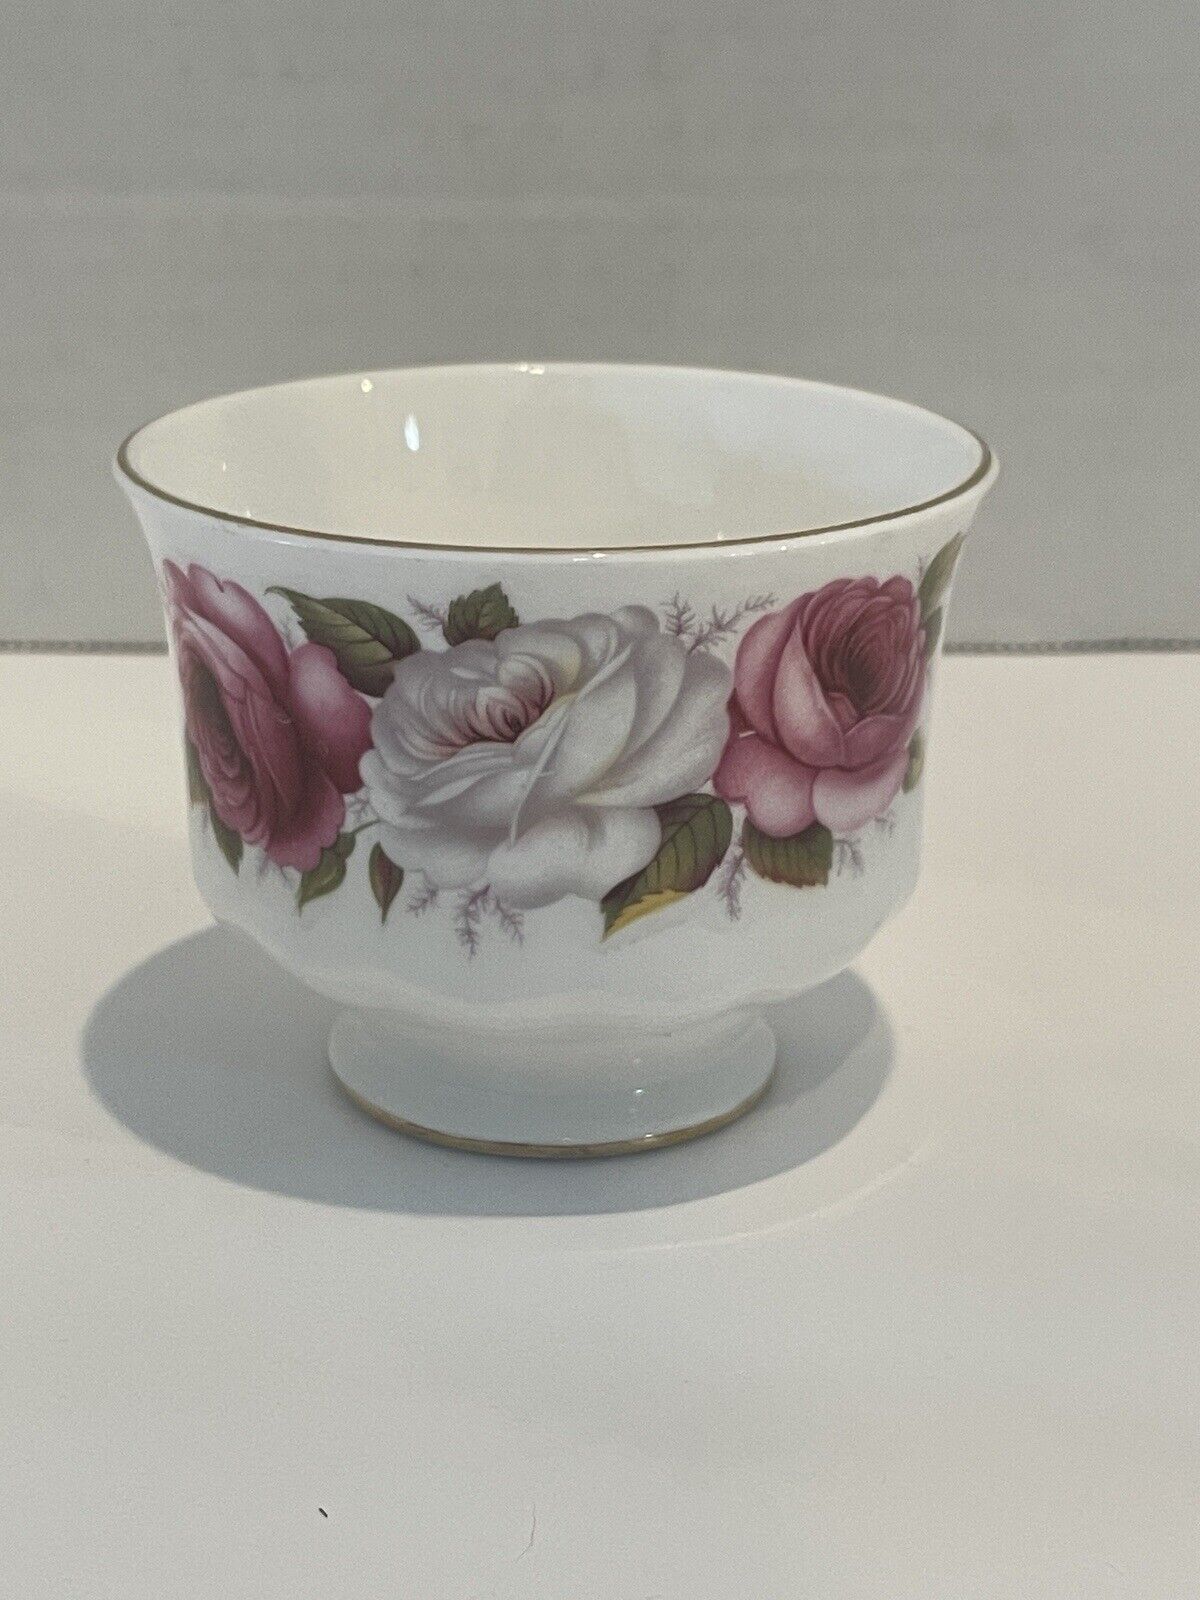 Princess Roses By Queen Anne - Mini Open Sugar Bowl 8605 Made In England